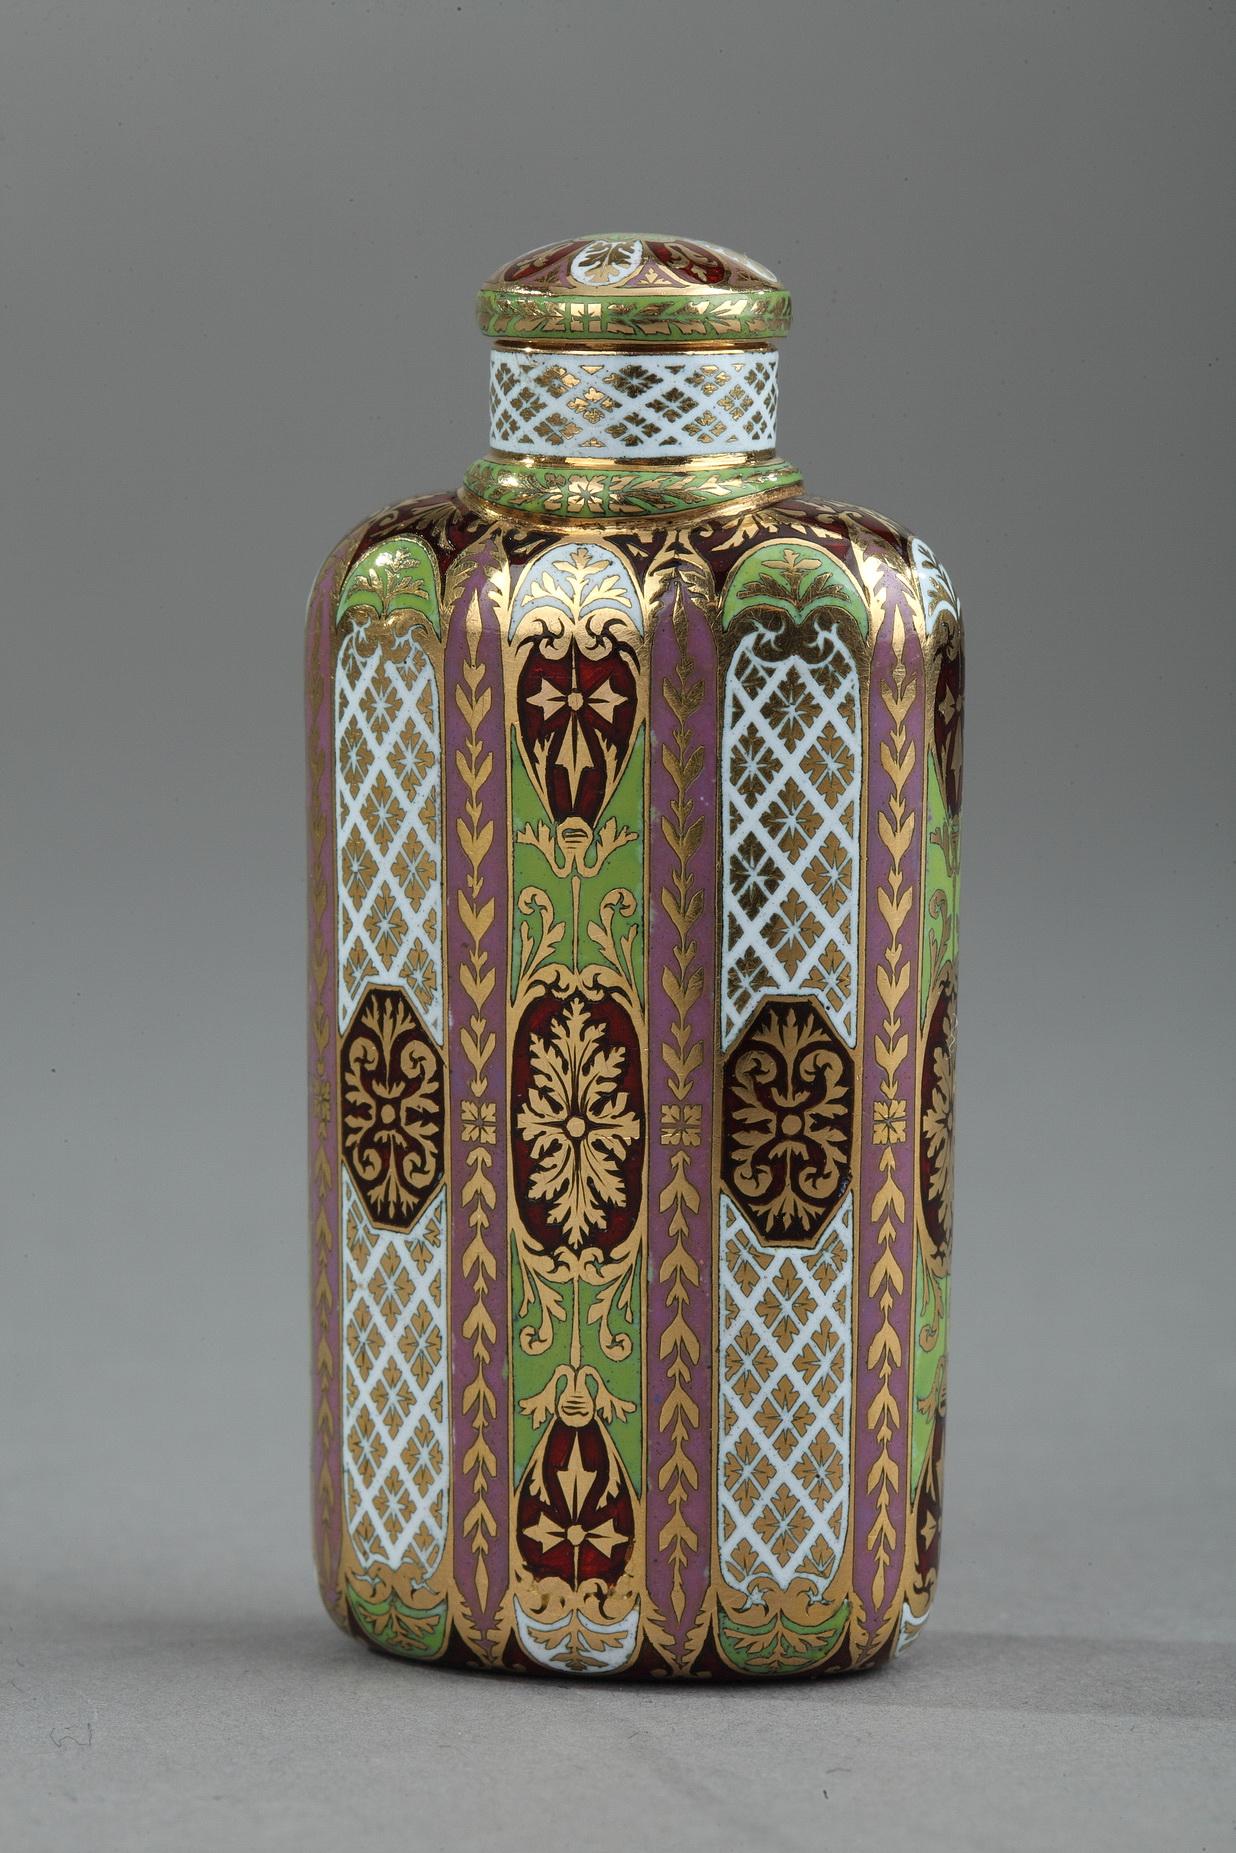 Rectangular scent perfume bottle in enameled gold. The flask features refined enameling techniques with geometric and floral patterns. The red enamel is translucent, leaving the intricate geometric pattern in the gold underneath visible. The